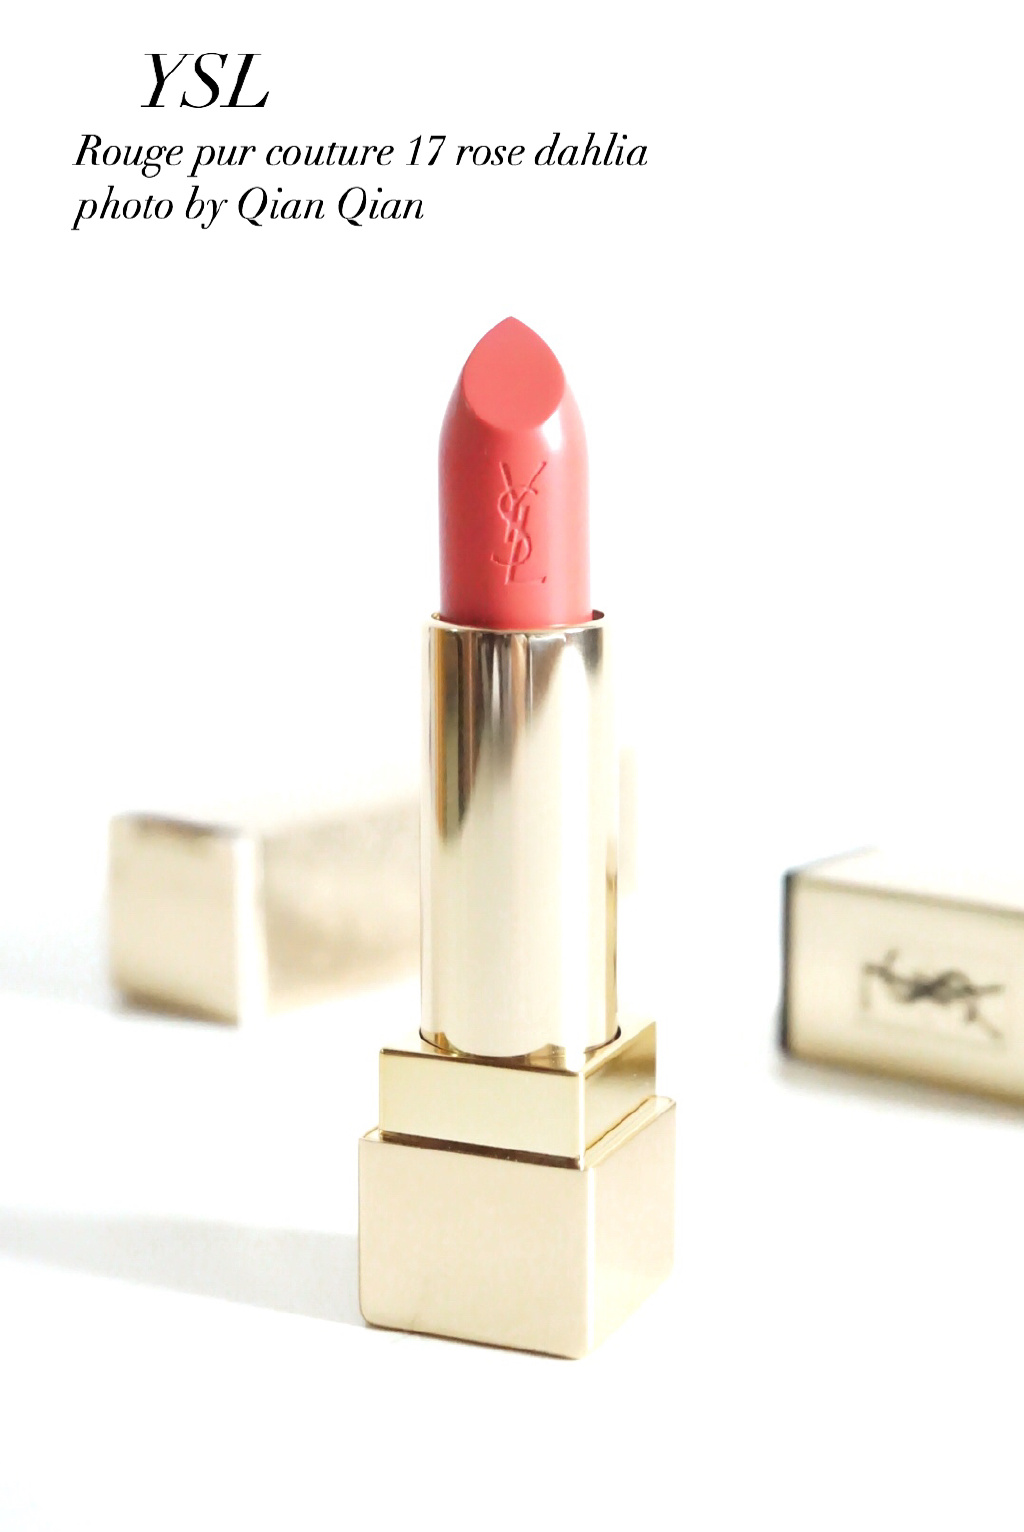 YSL Rouge pur couture 17 rose dahliaYSL方管17号试色